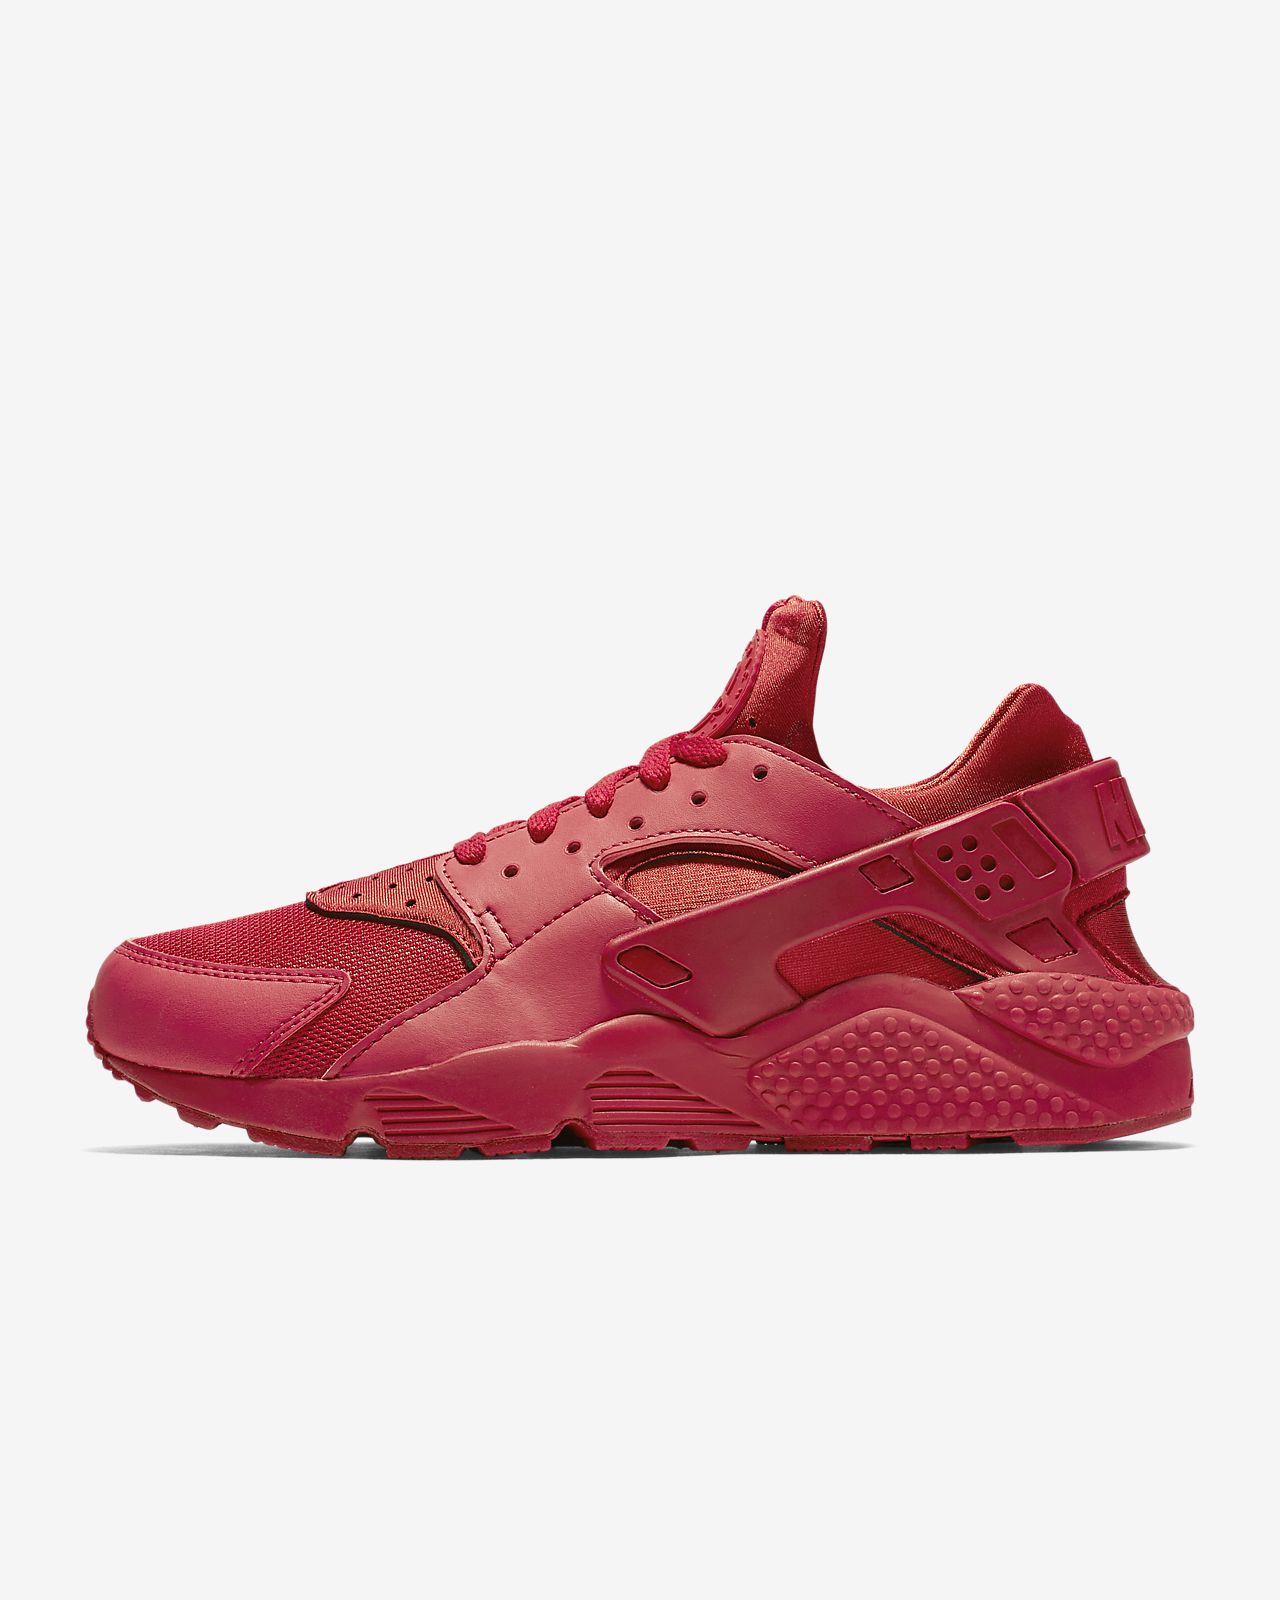 huaraches in stores near me